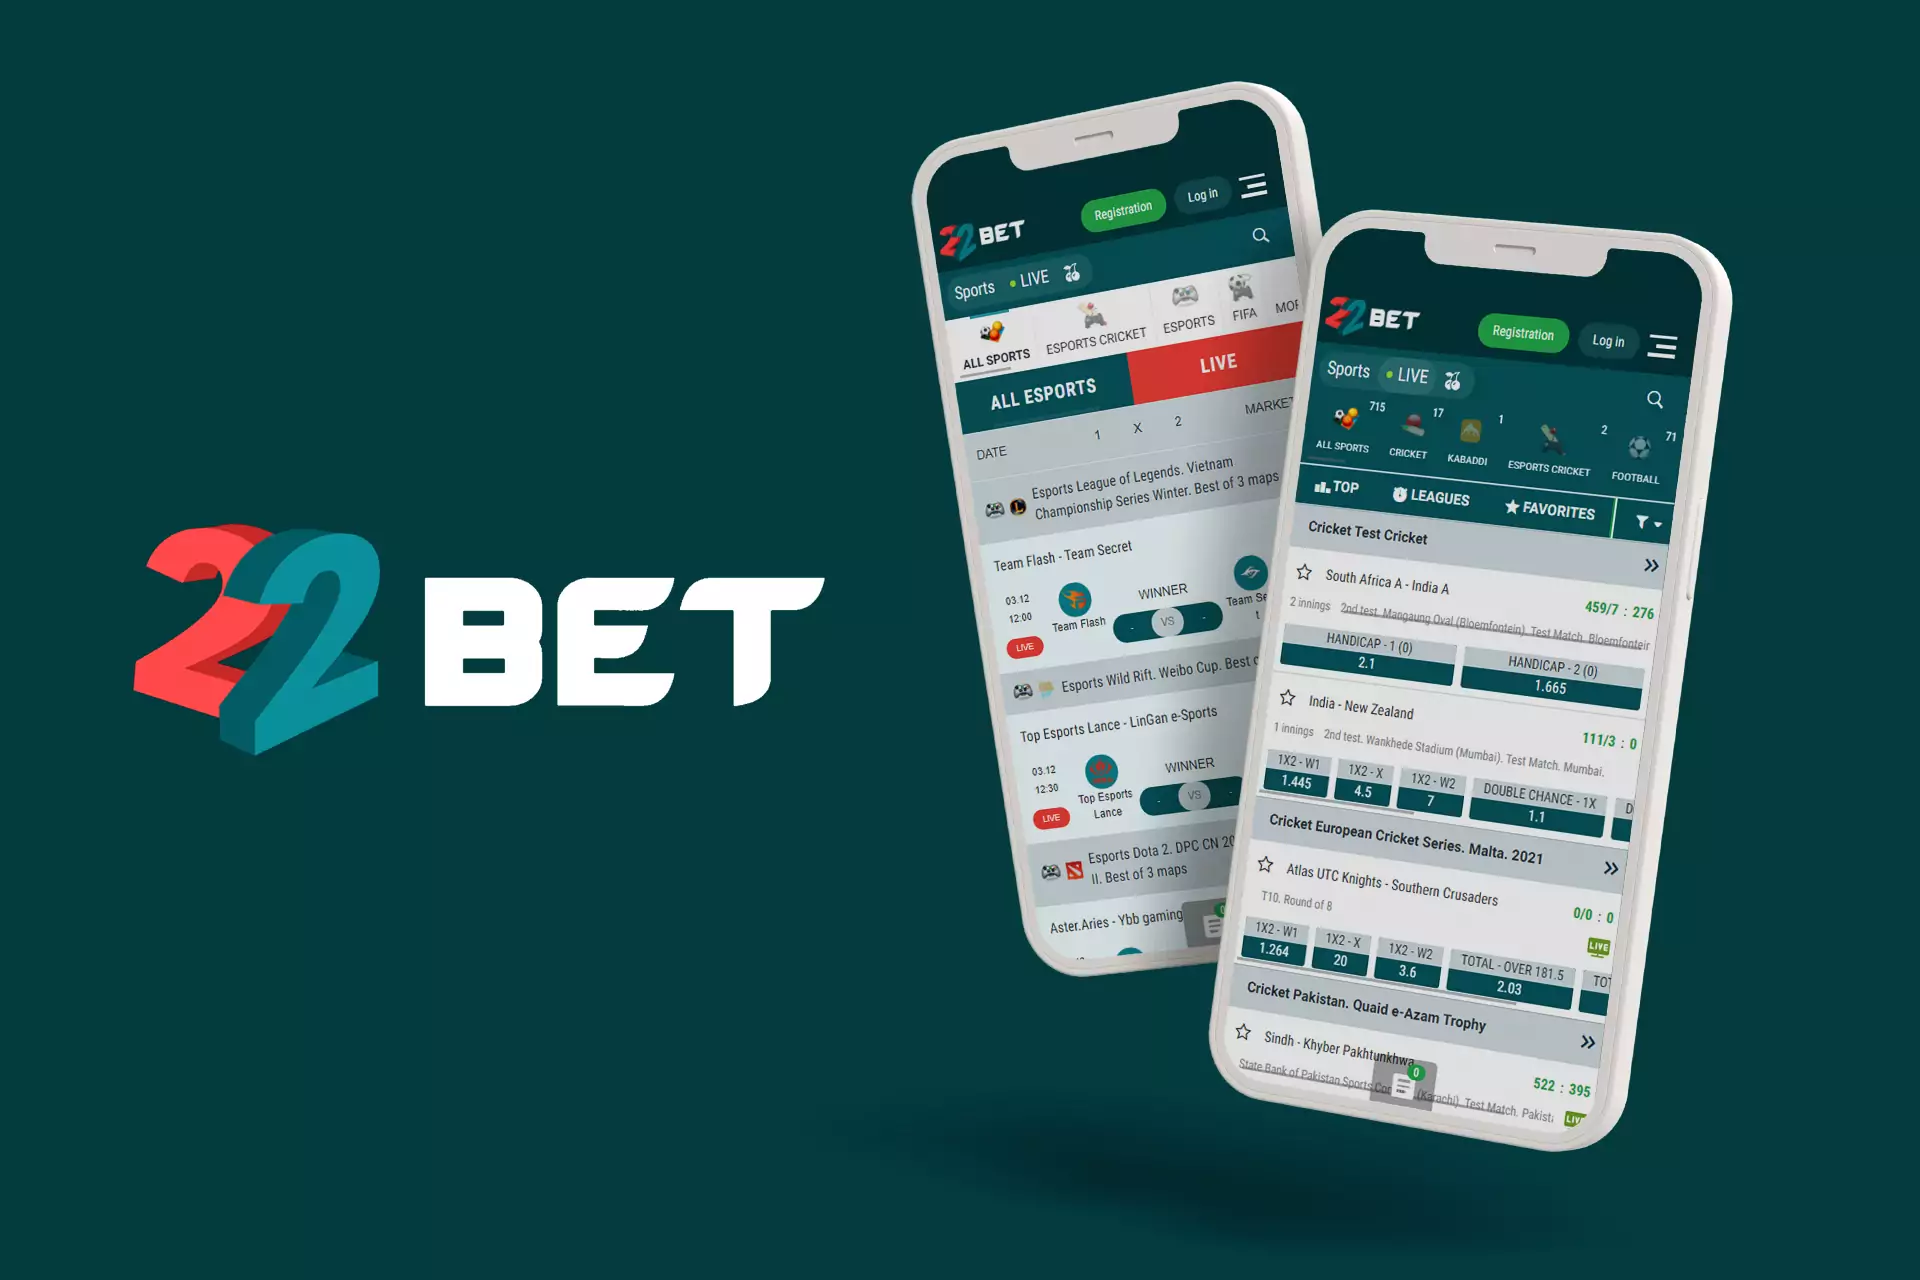 The 22bet app offers a variety of sports betting options and casino games.